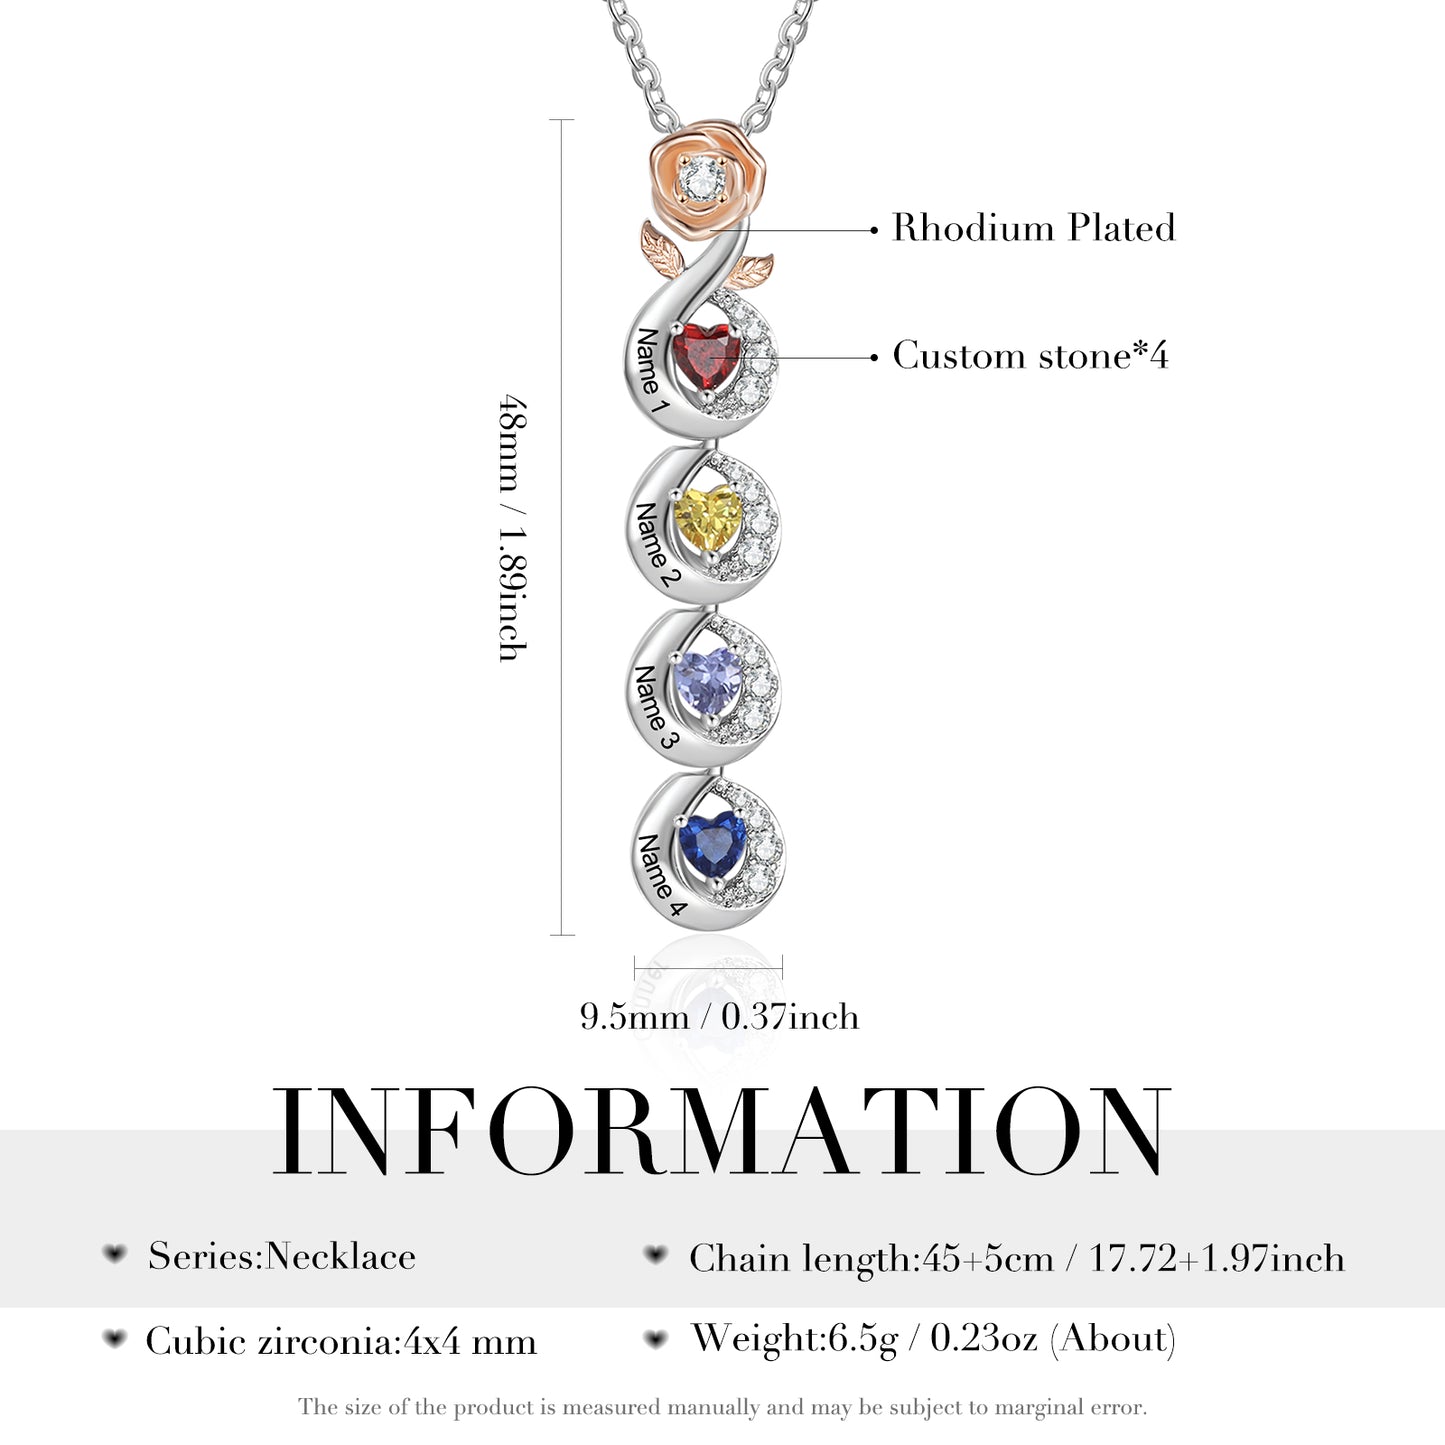 Rose of Heart Birthstone Necklace